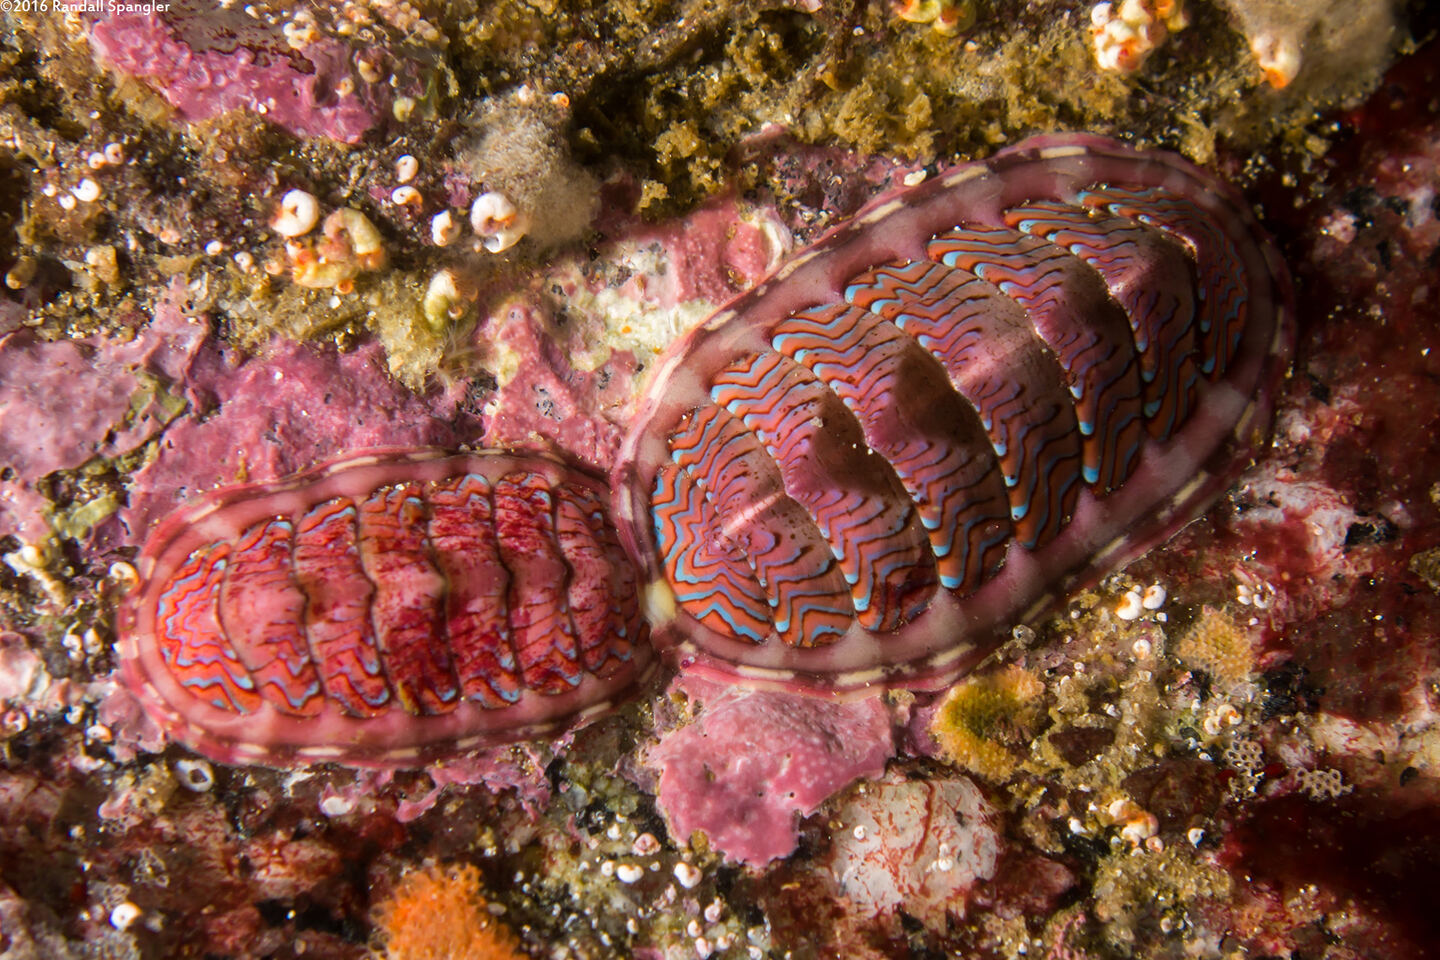 Tonicella lokii (Flame Lined Chiton); These appear to be mating